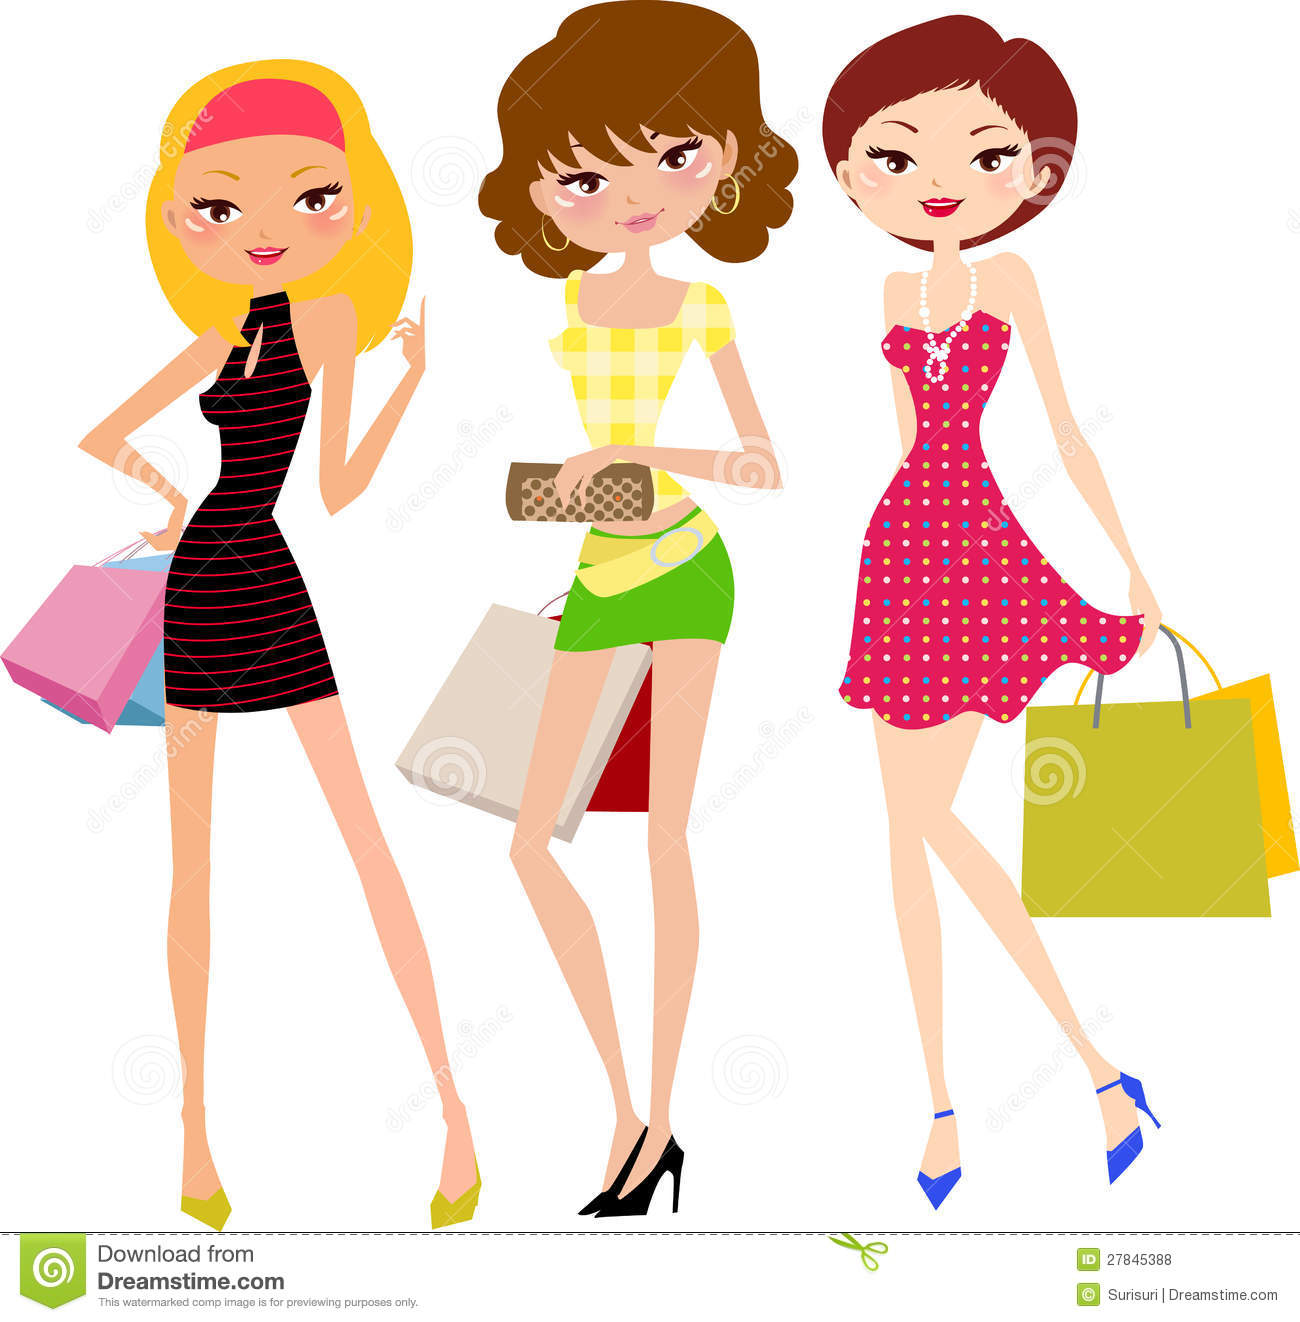 Three Pretty Girls With Shopping Bag Royalty Free Stock Photos   Image    